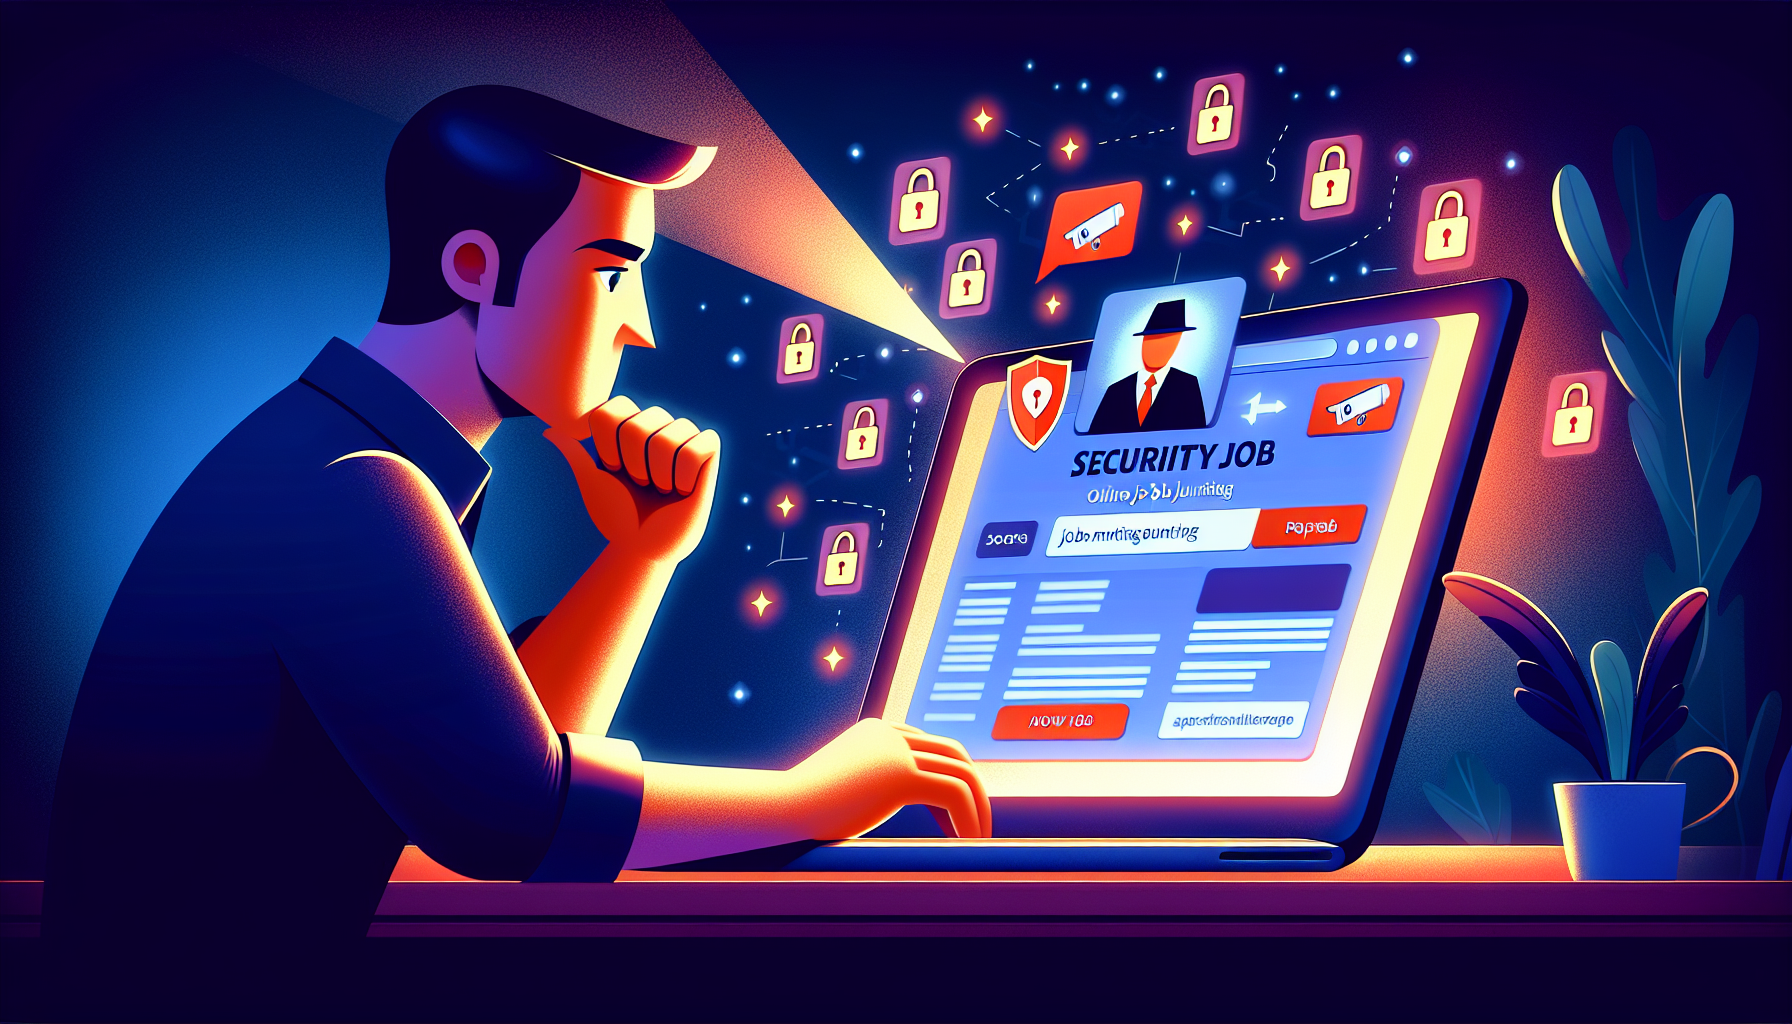 Cartoon illustration of a person browsing security job listings on a laptop